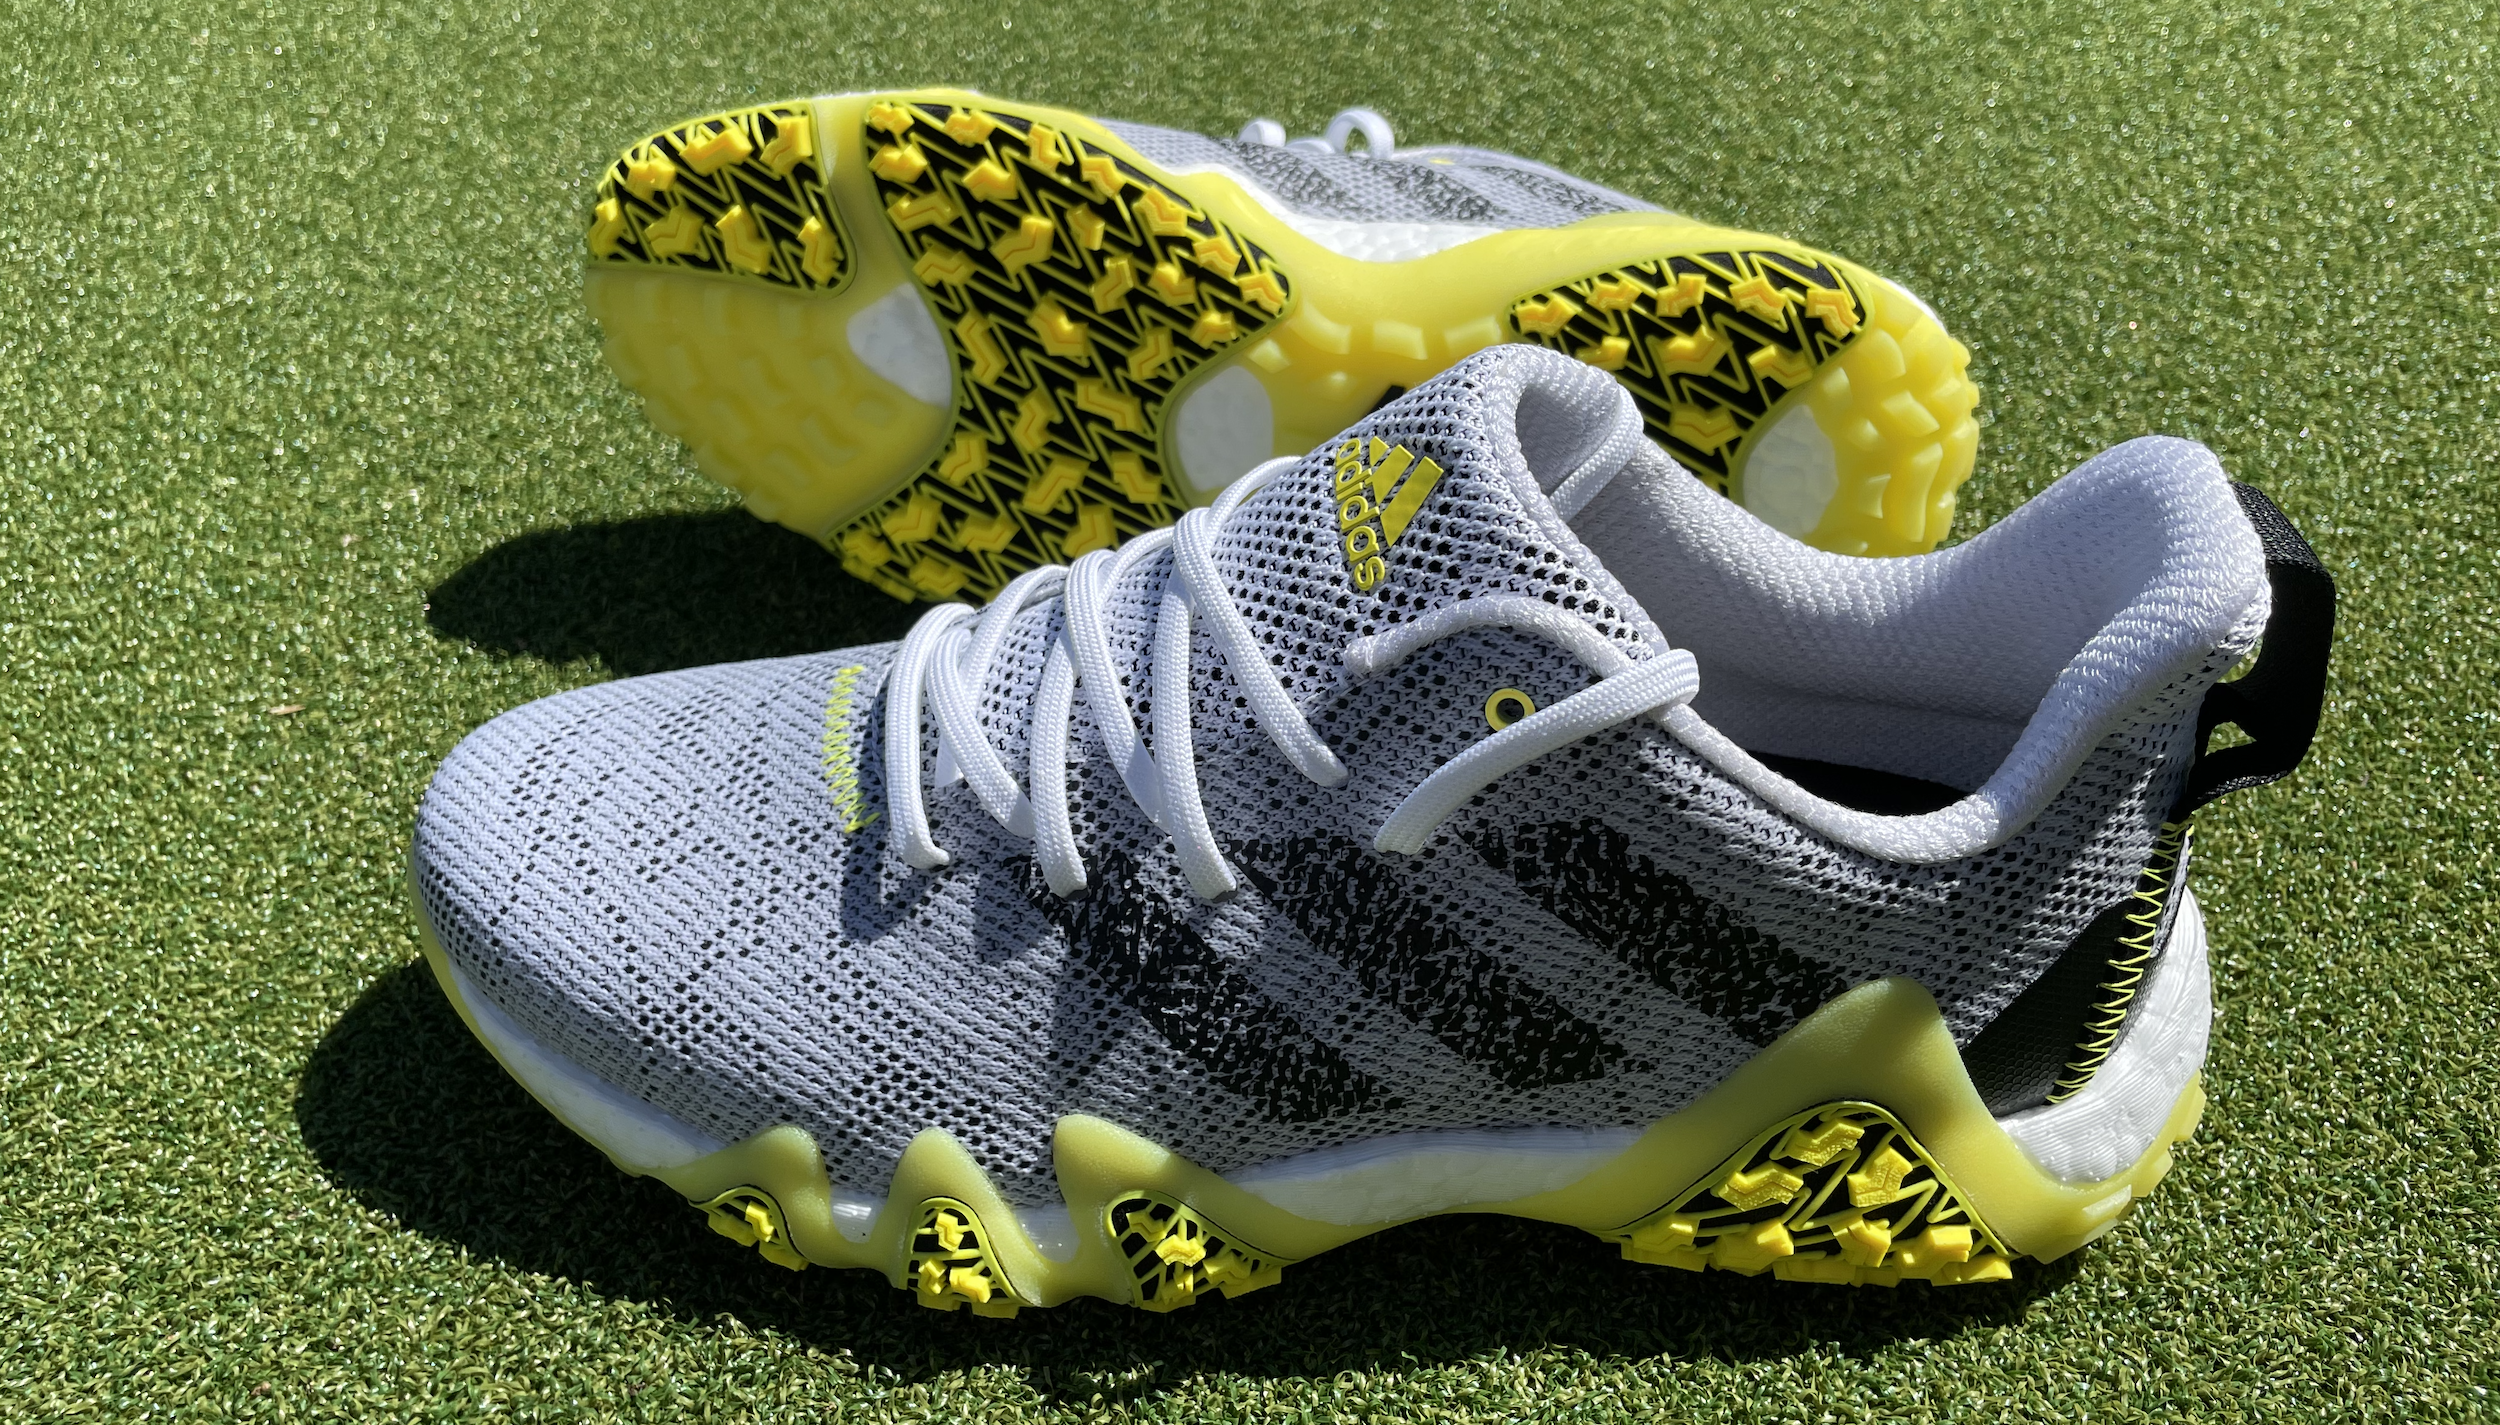 Adidas CODECHAOS 22 review: possibly the most comfortable golf